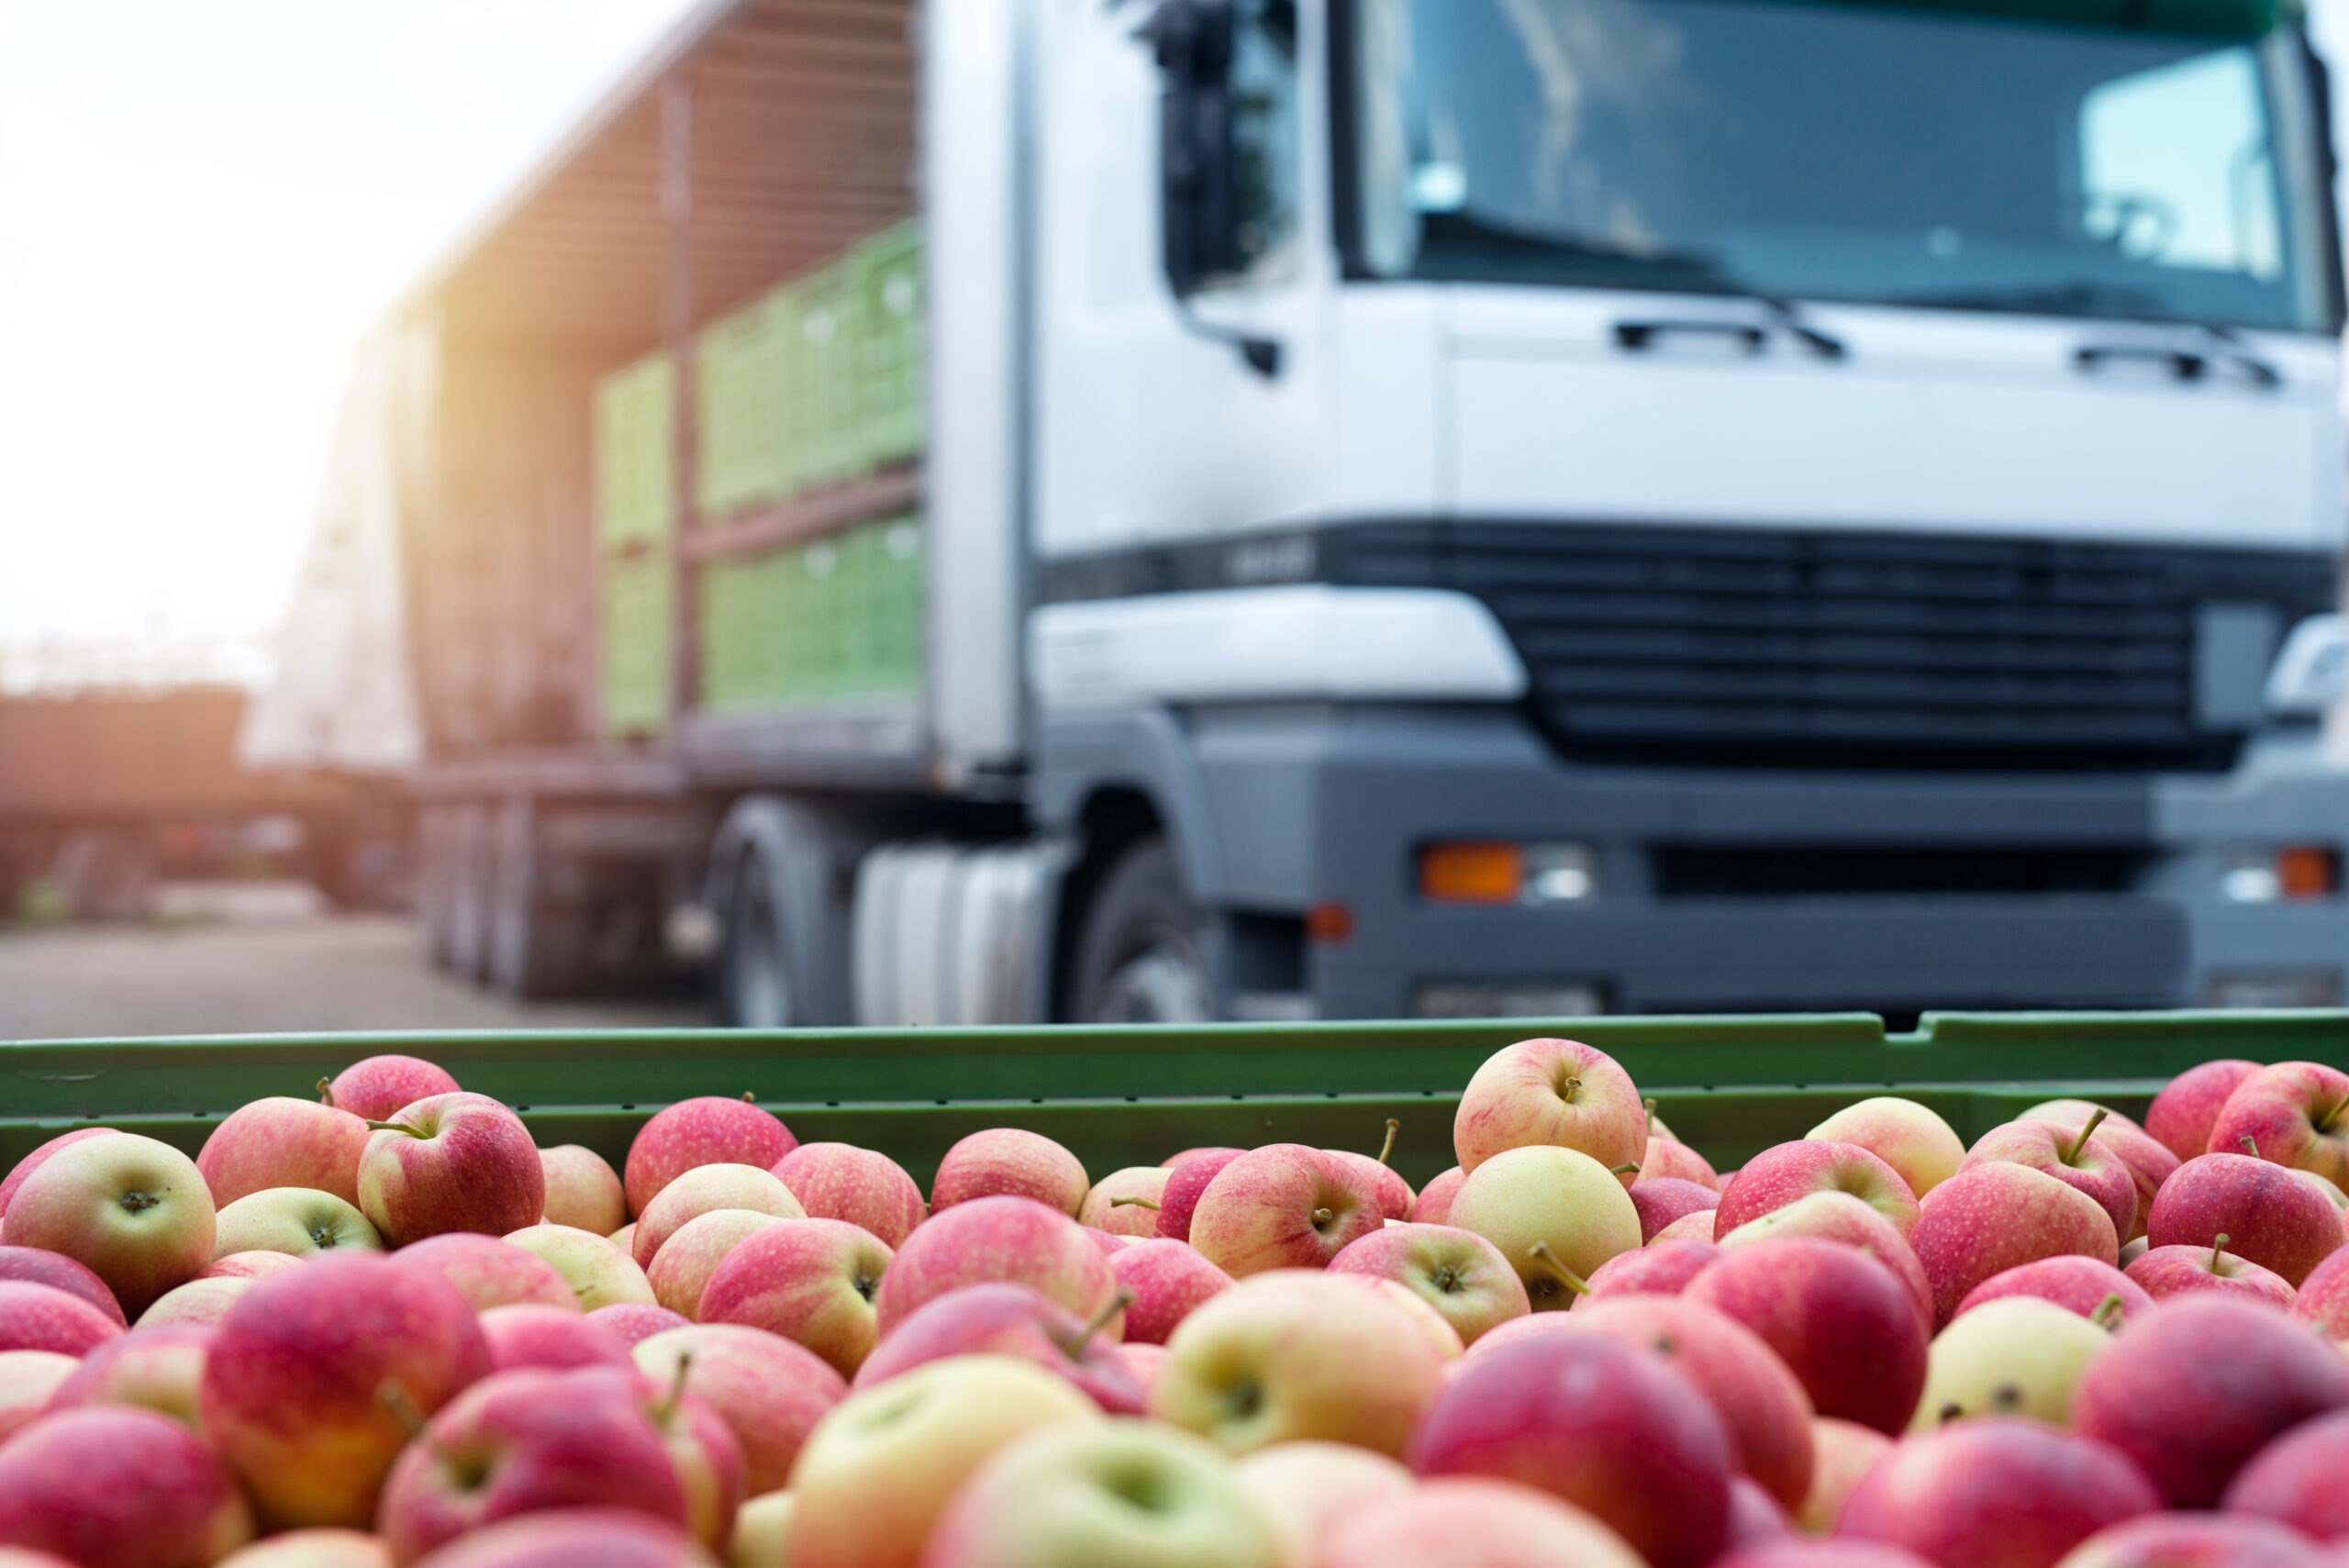 City Harvest Feature Image: a food delivery truck delivers apples